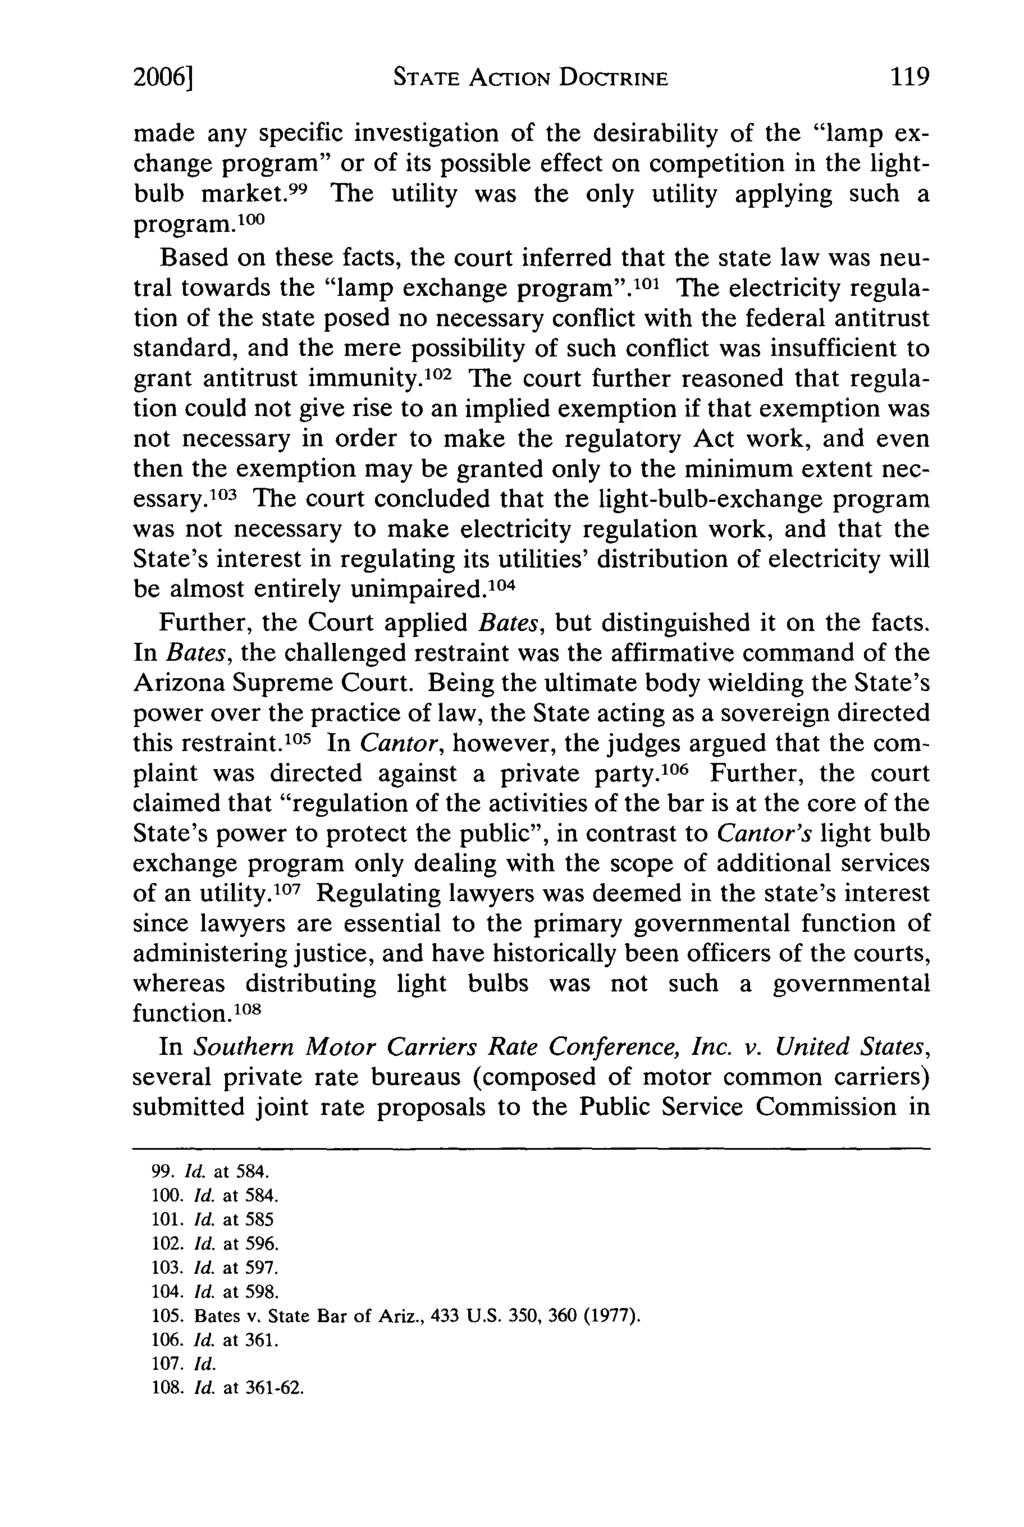 2006] STATE ACTION DOCTRINE made any specific investigation of the desirability of the "lamp exchange program" or of its possible effect on competition in the lightbulb market.